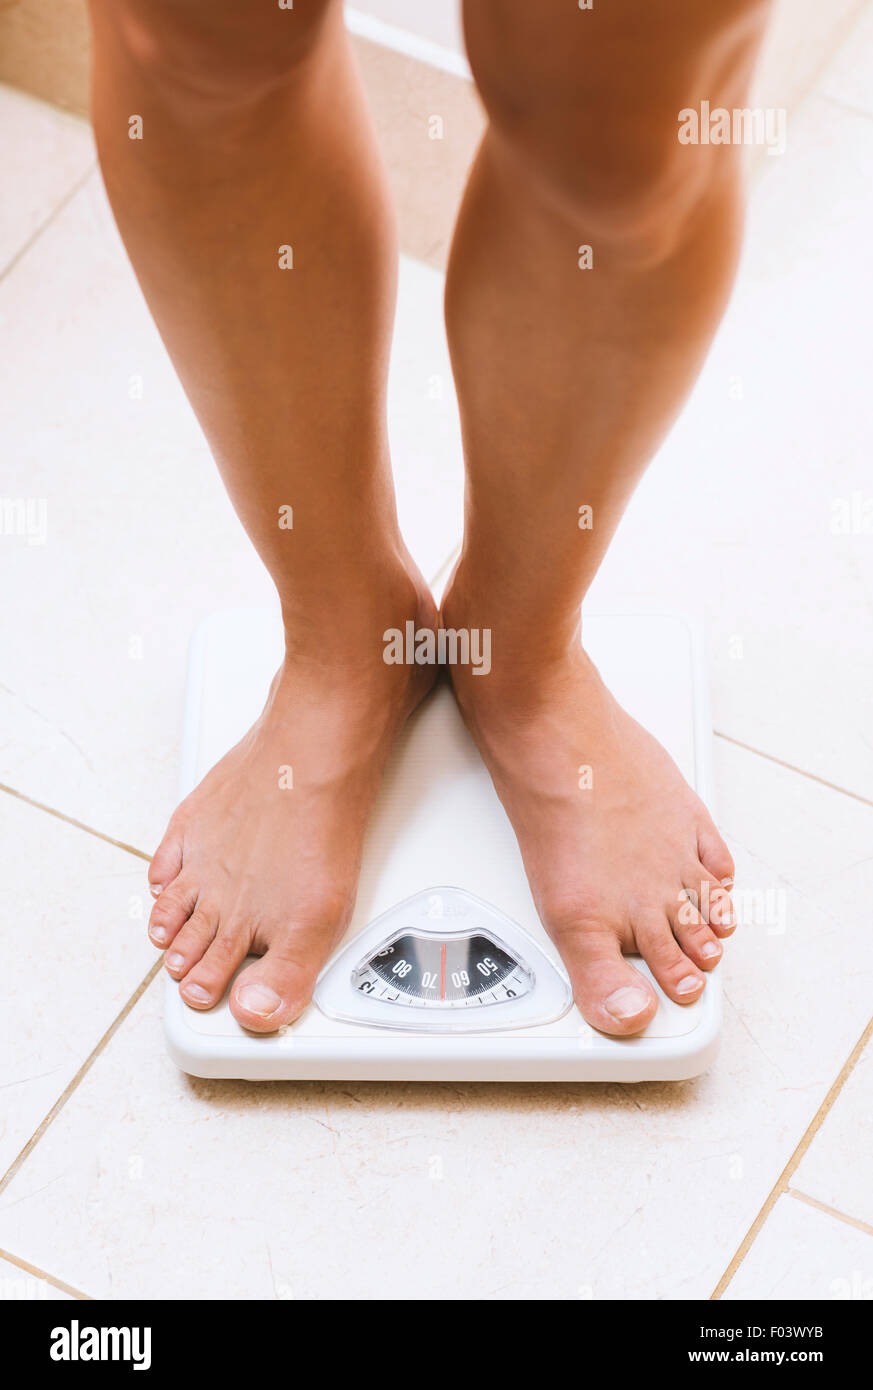 Woman weighing herself barefoot on bathroom scales Stock Photo